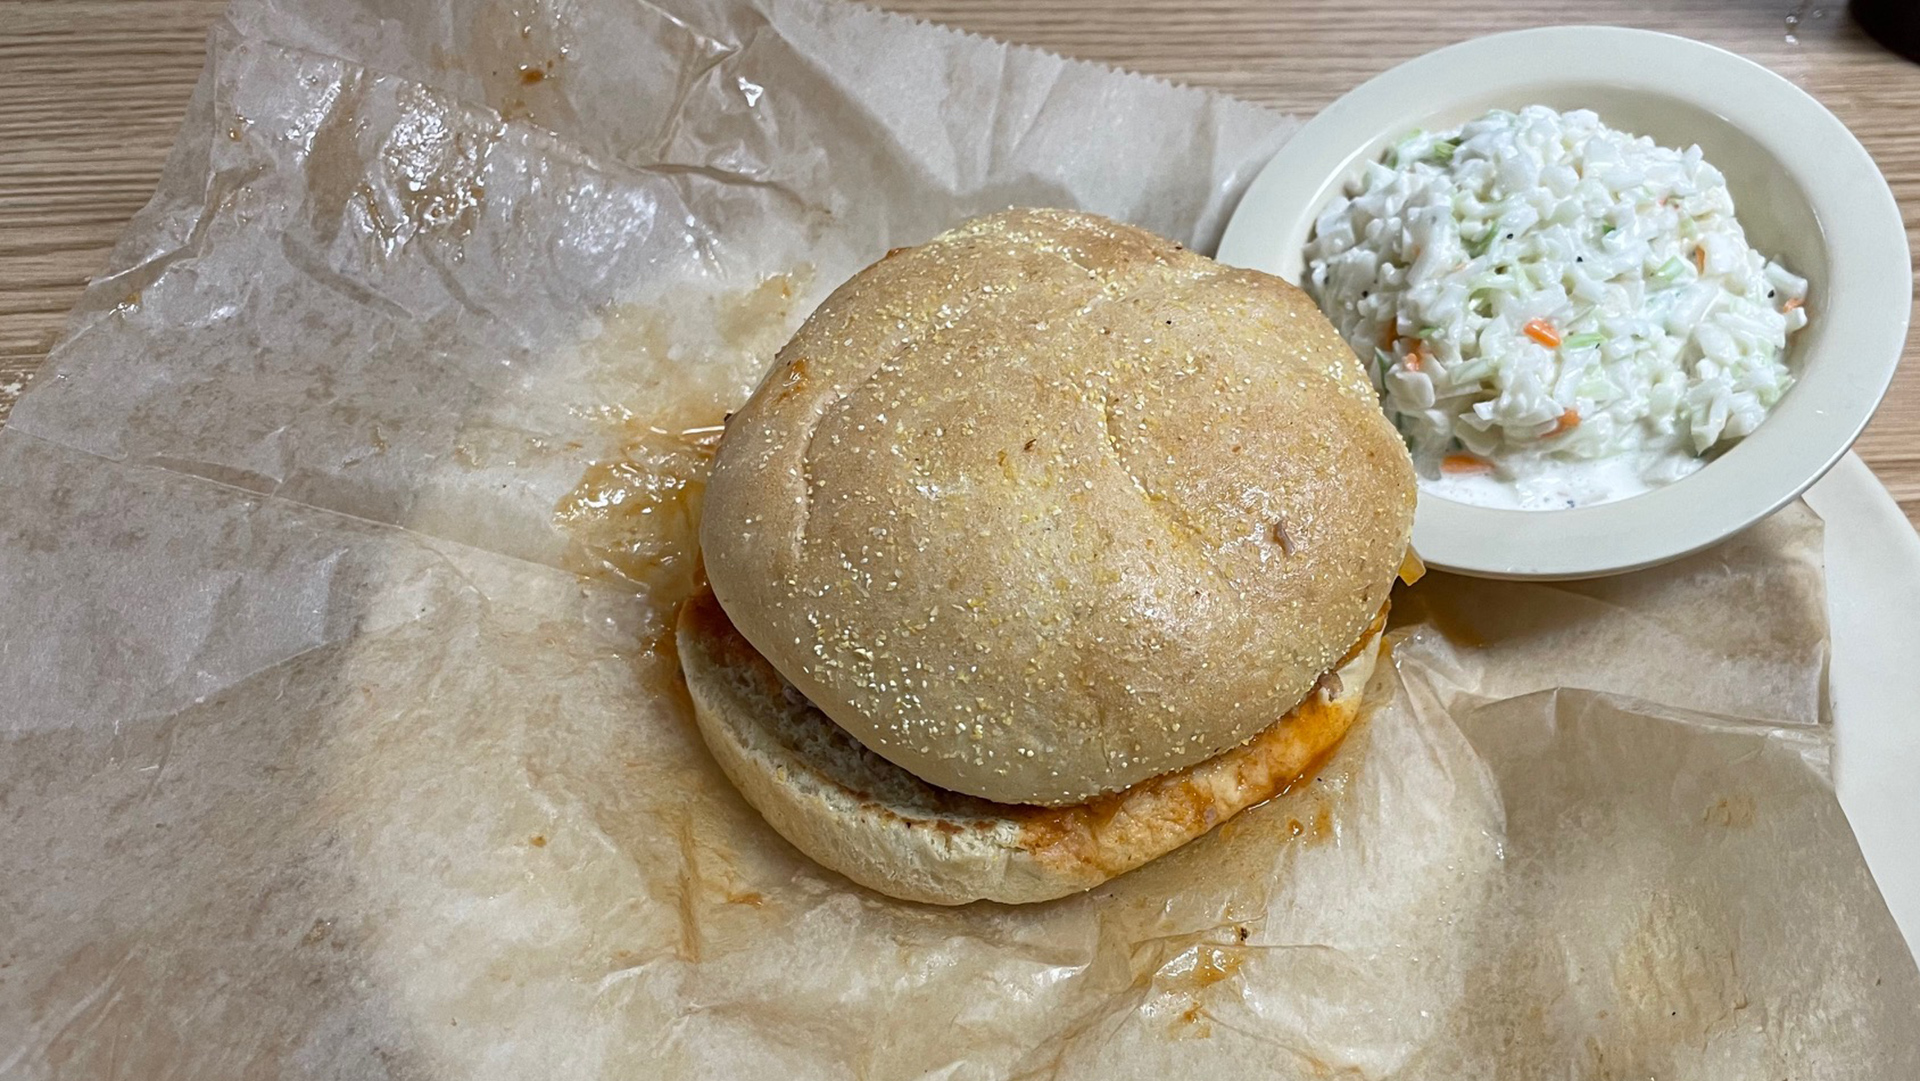 The Diablo sandwich at the world's last remaining Old Hickory House in Tucker, Georgia (photograph by Ed Southern)